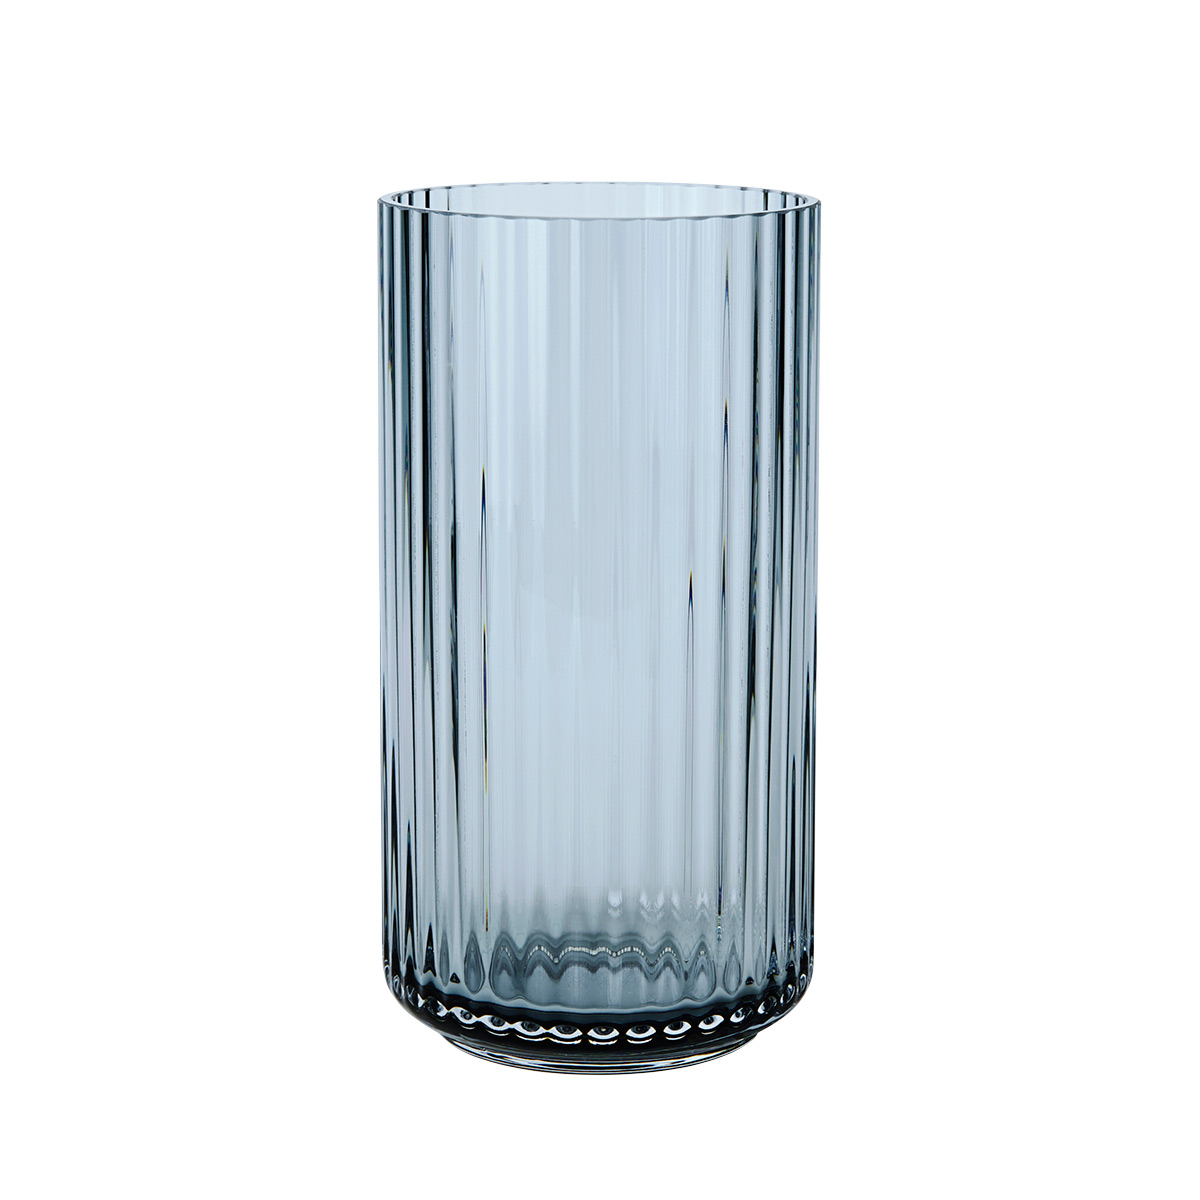 Lyngby Glass Vase | The Container Store